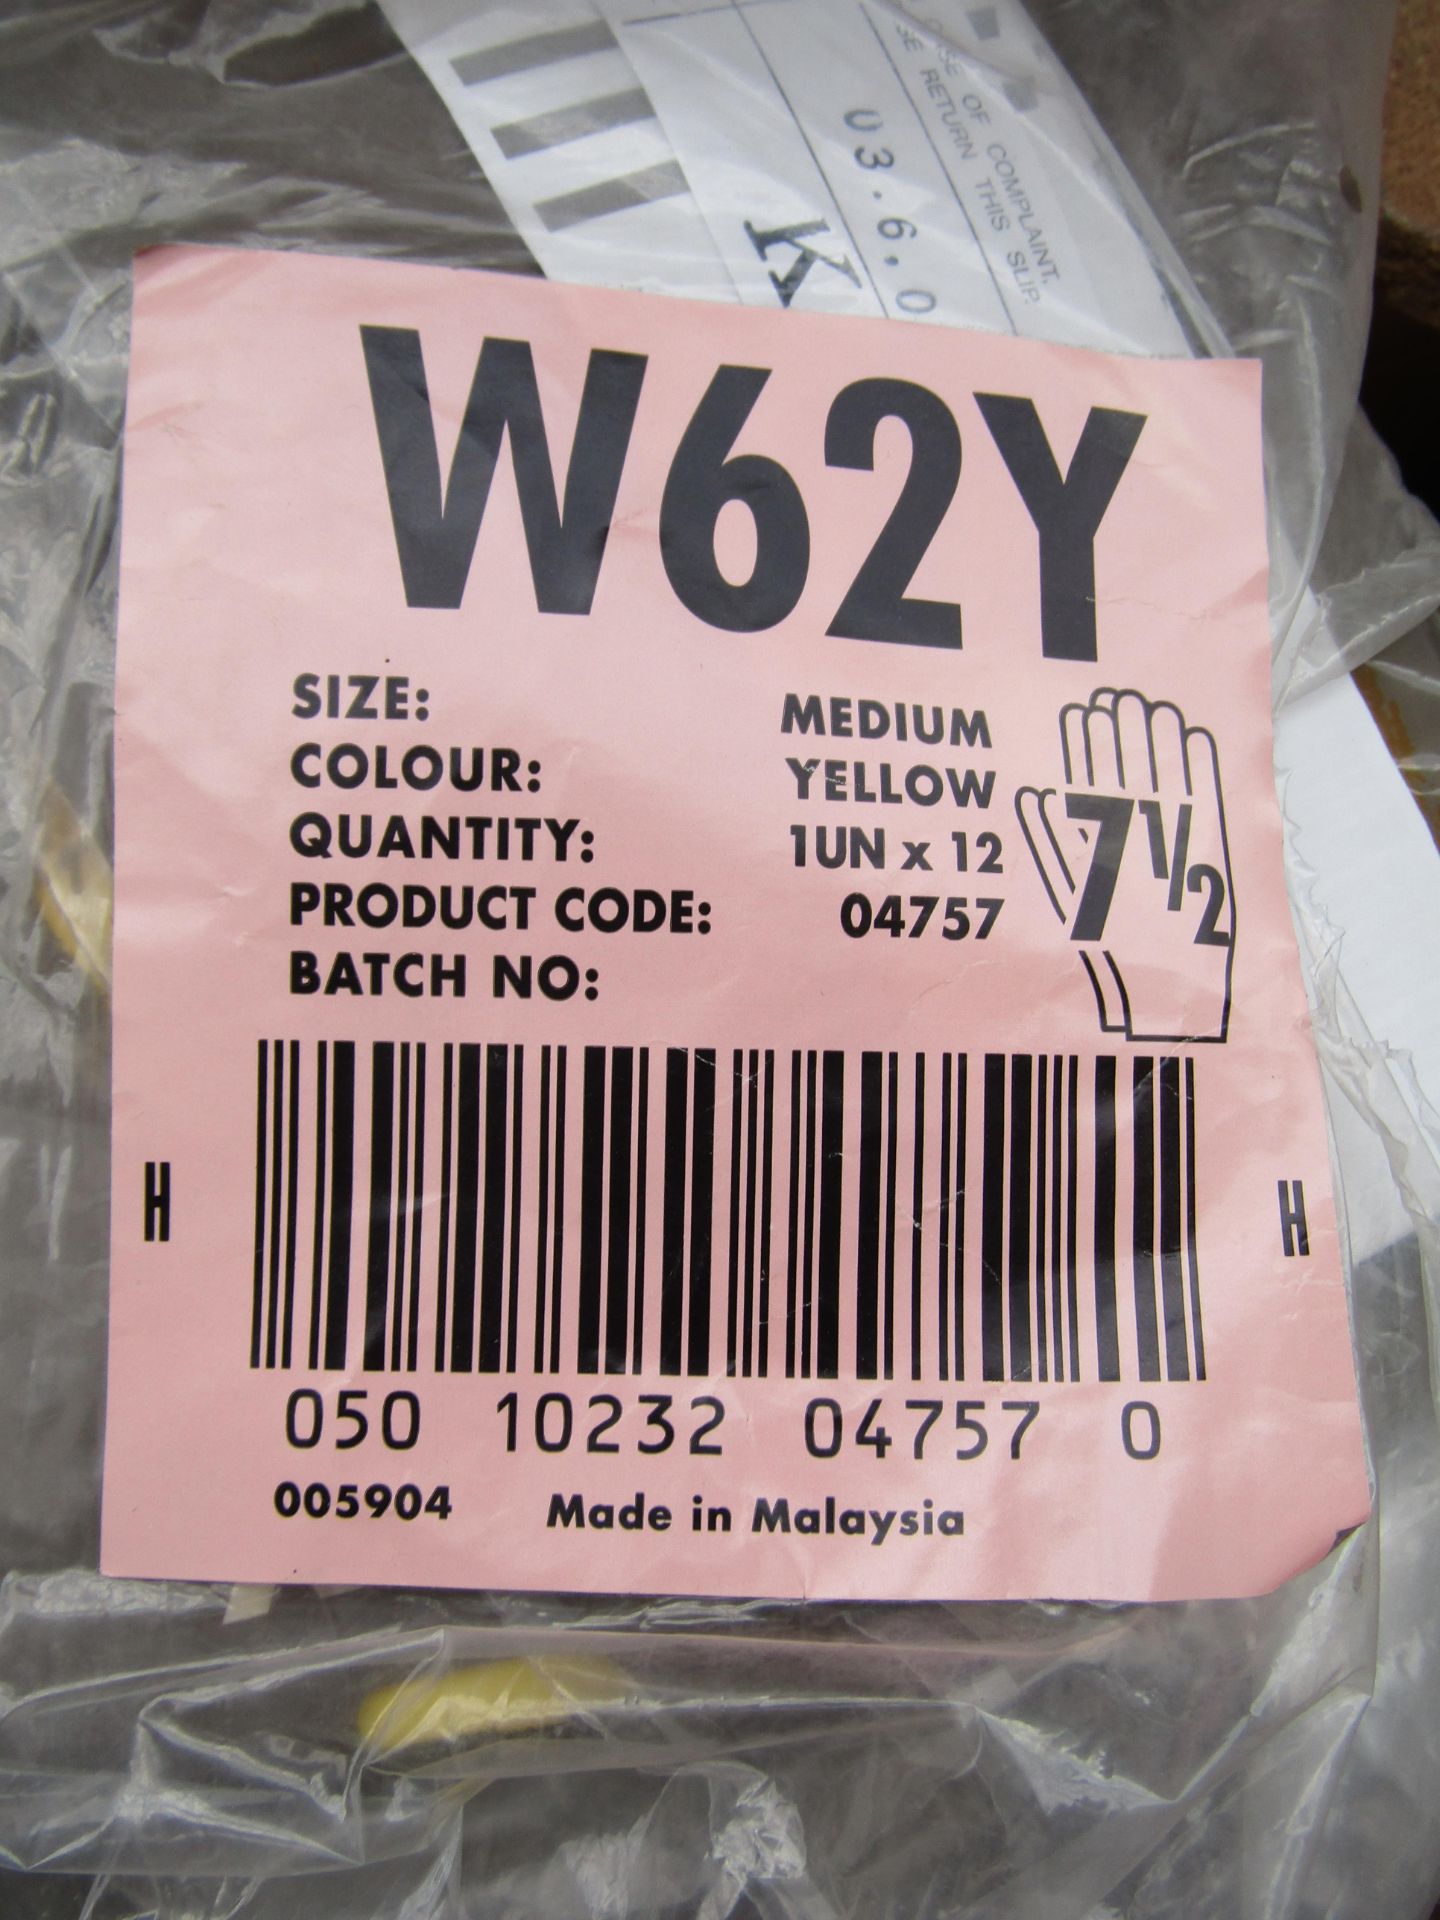 12x W26Y Protective gloves, size 7 1/2, new and packaged.